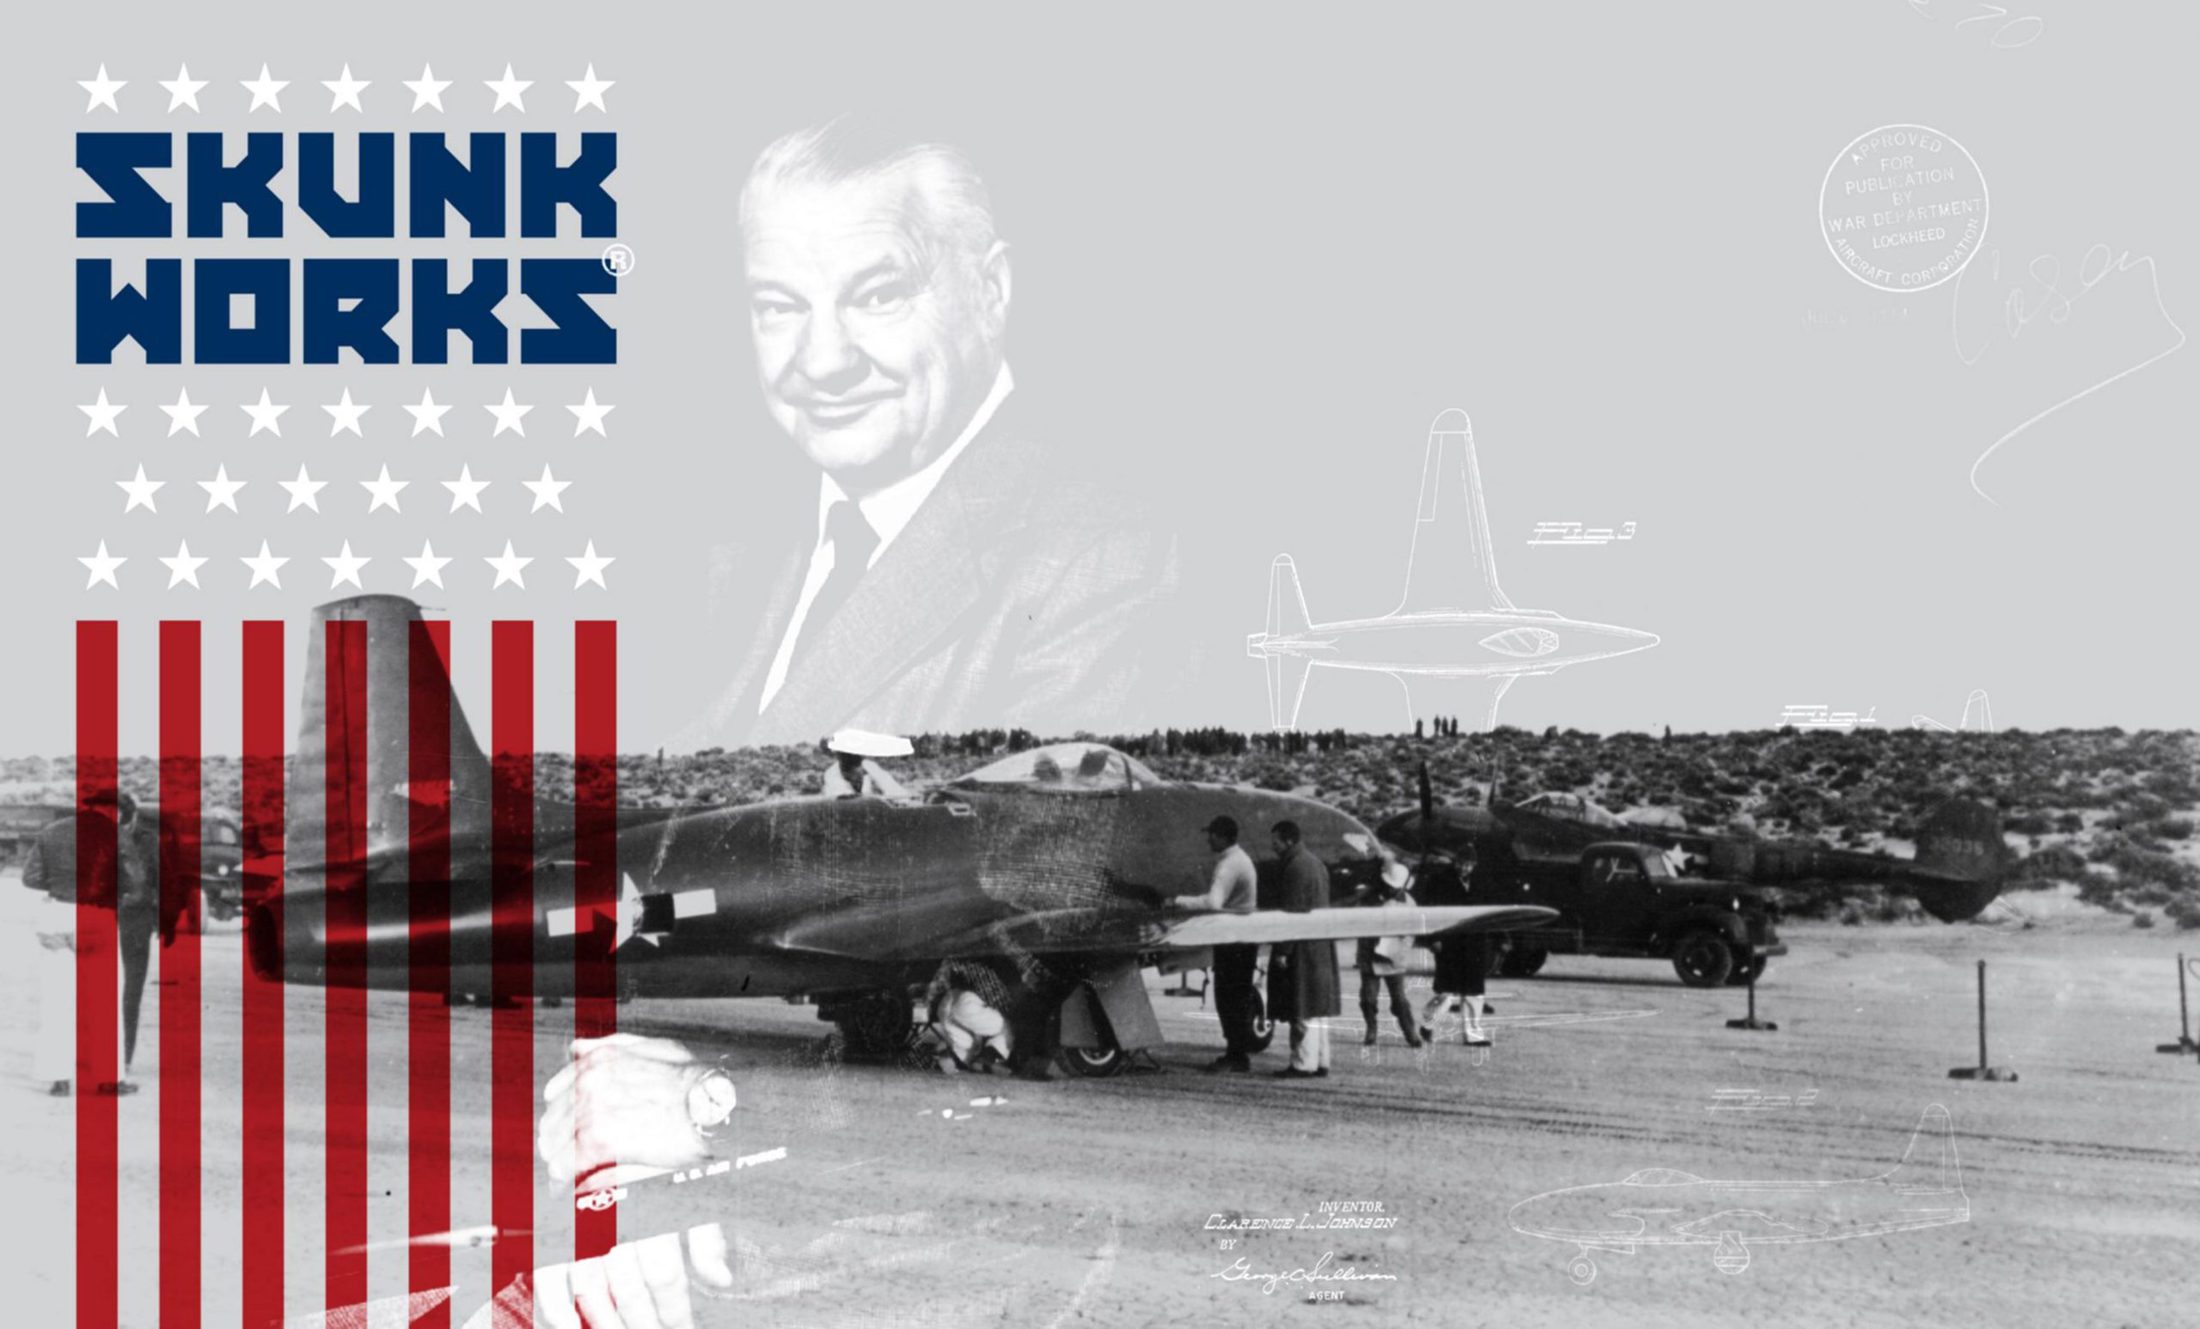 Skunk Works article - On Innovation in Large Organizations